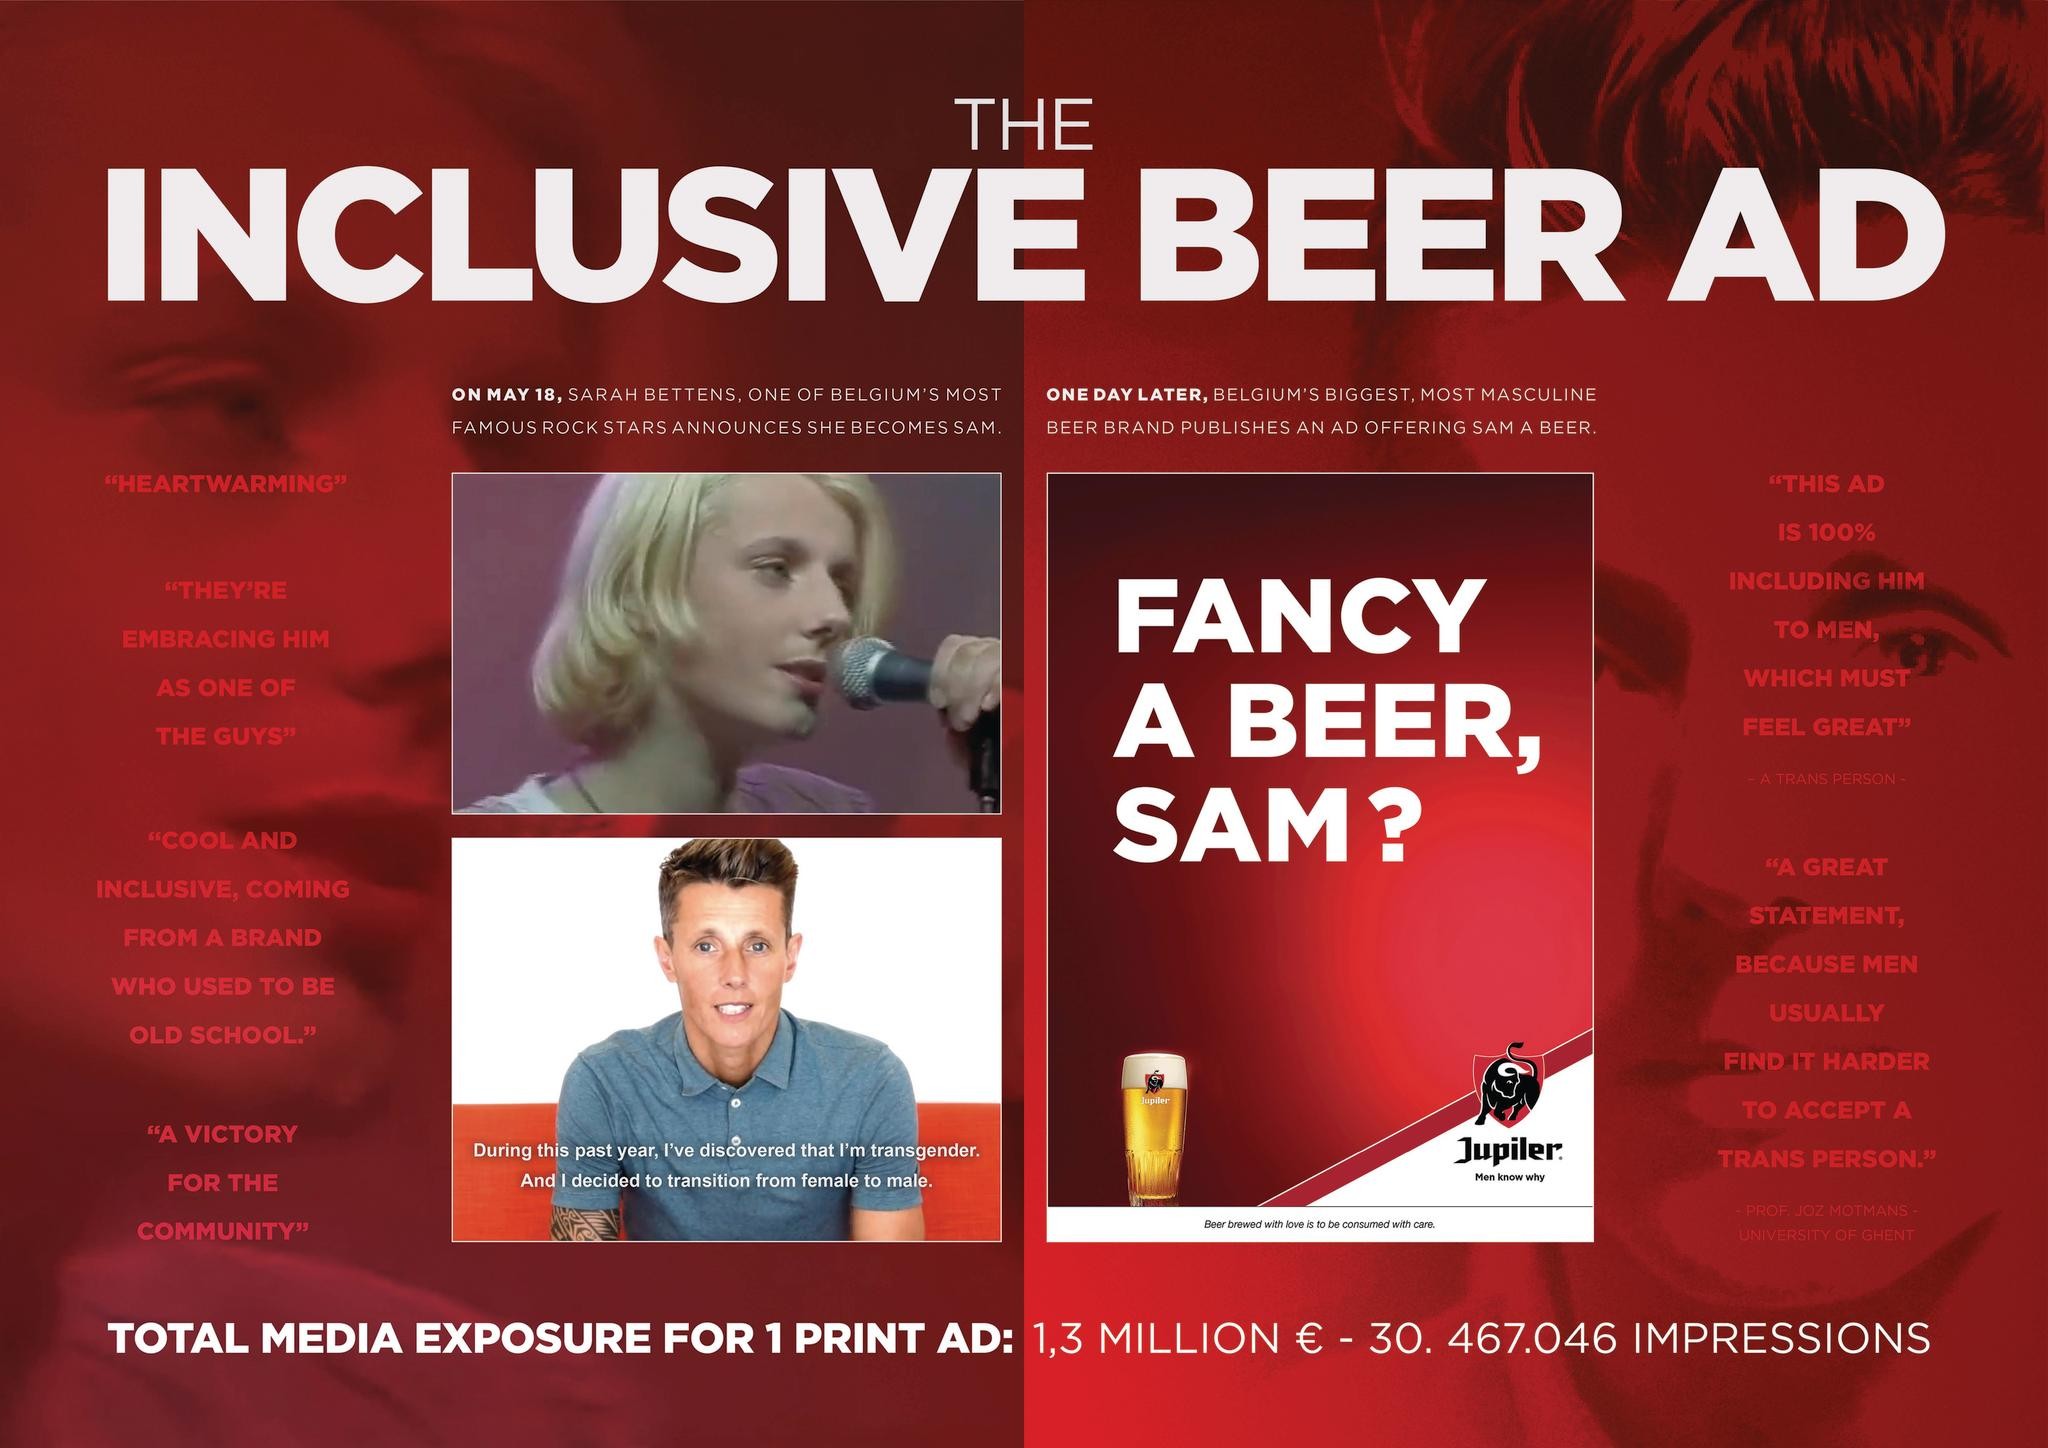 The Inclusive Beer Ad